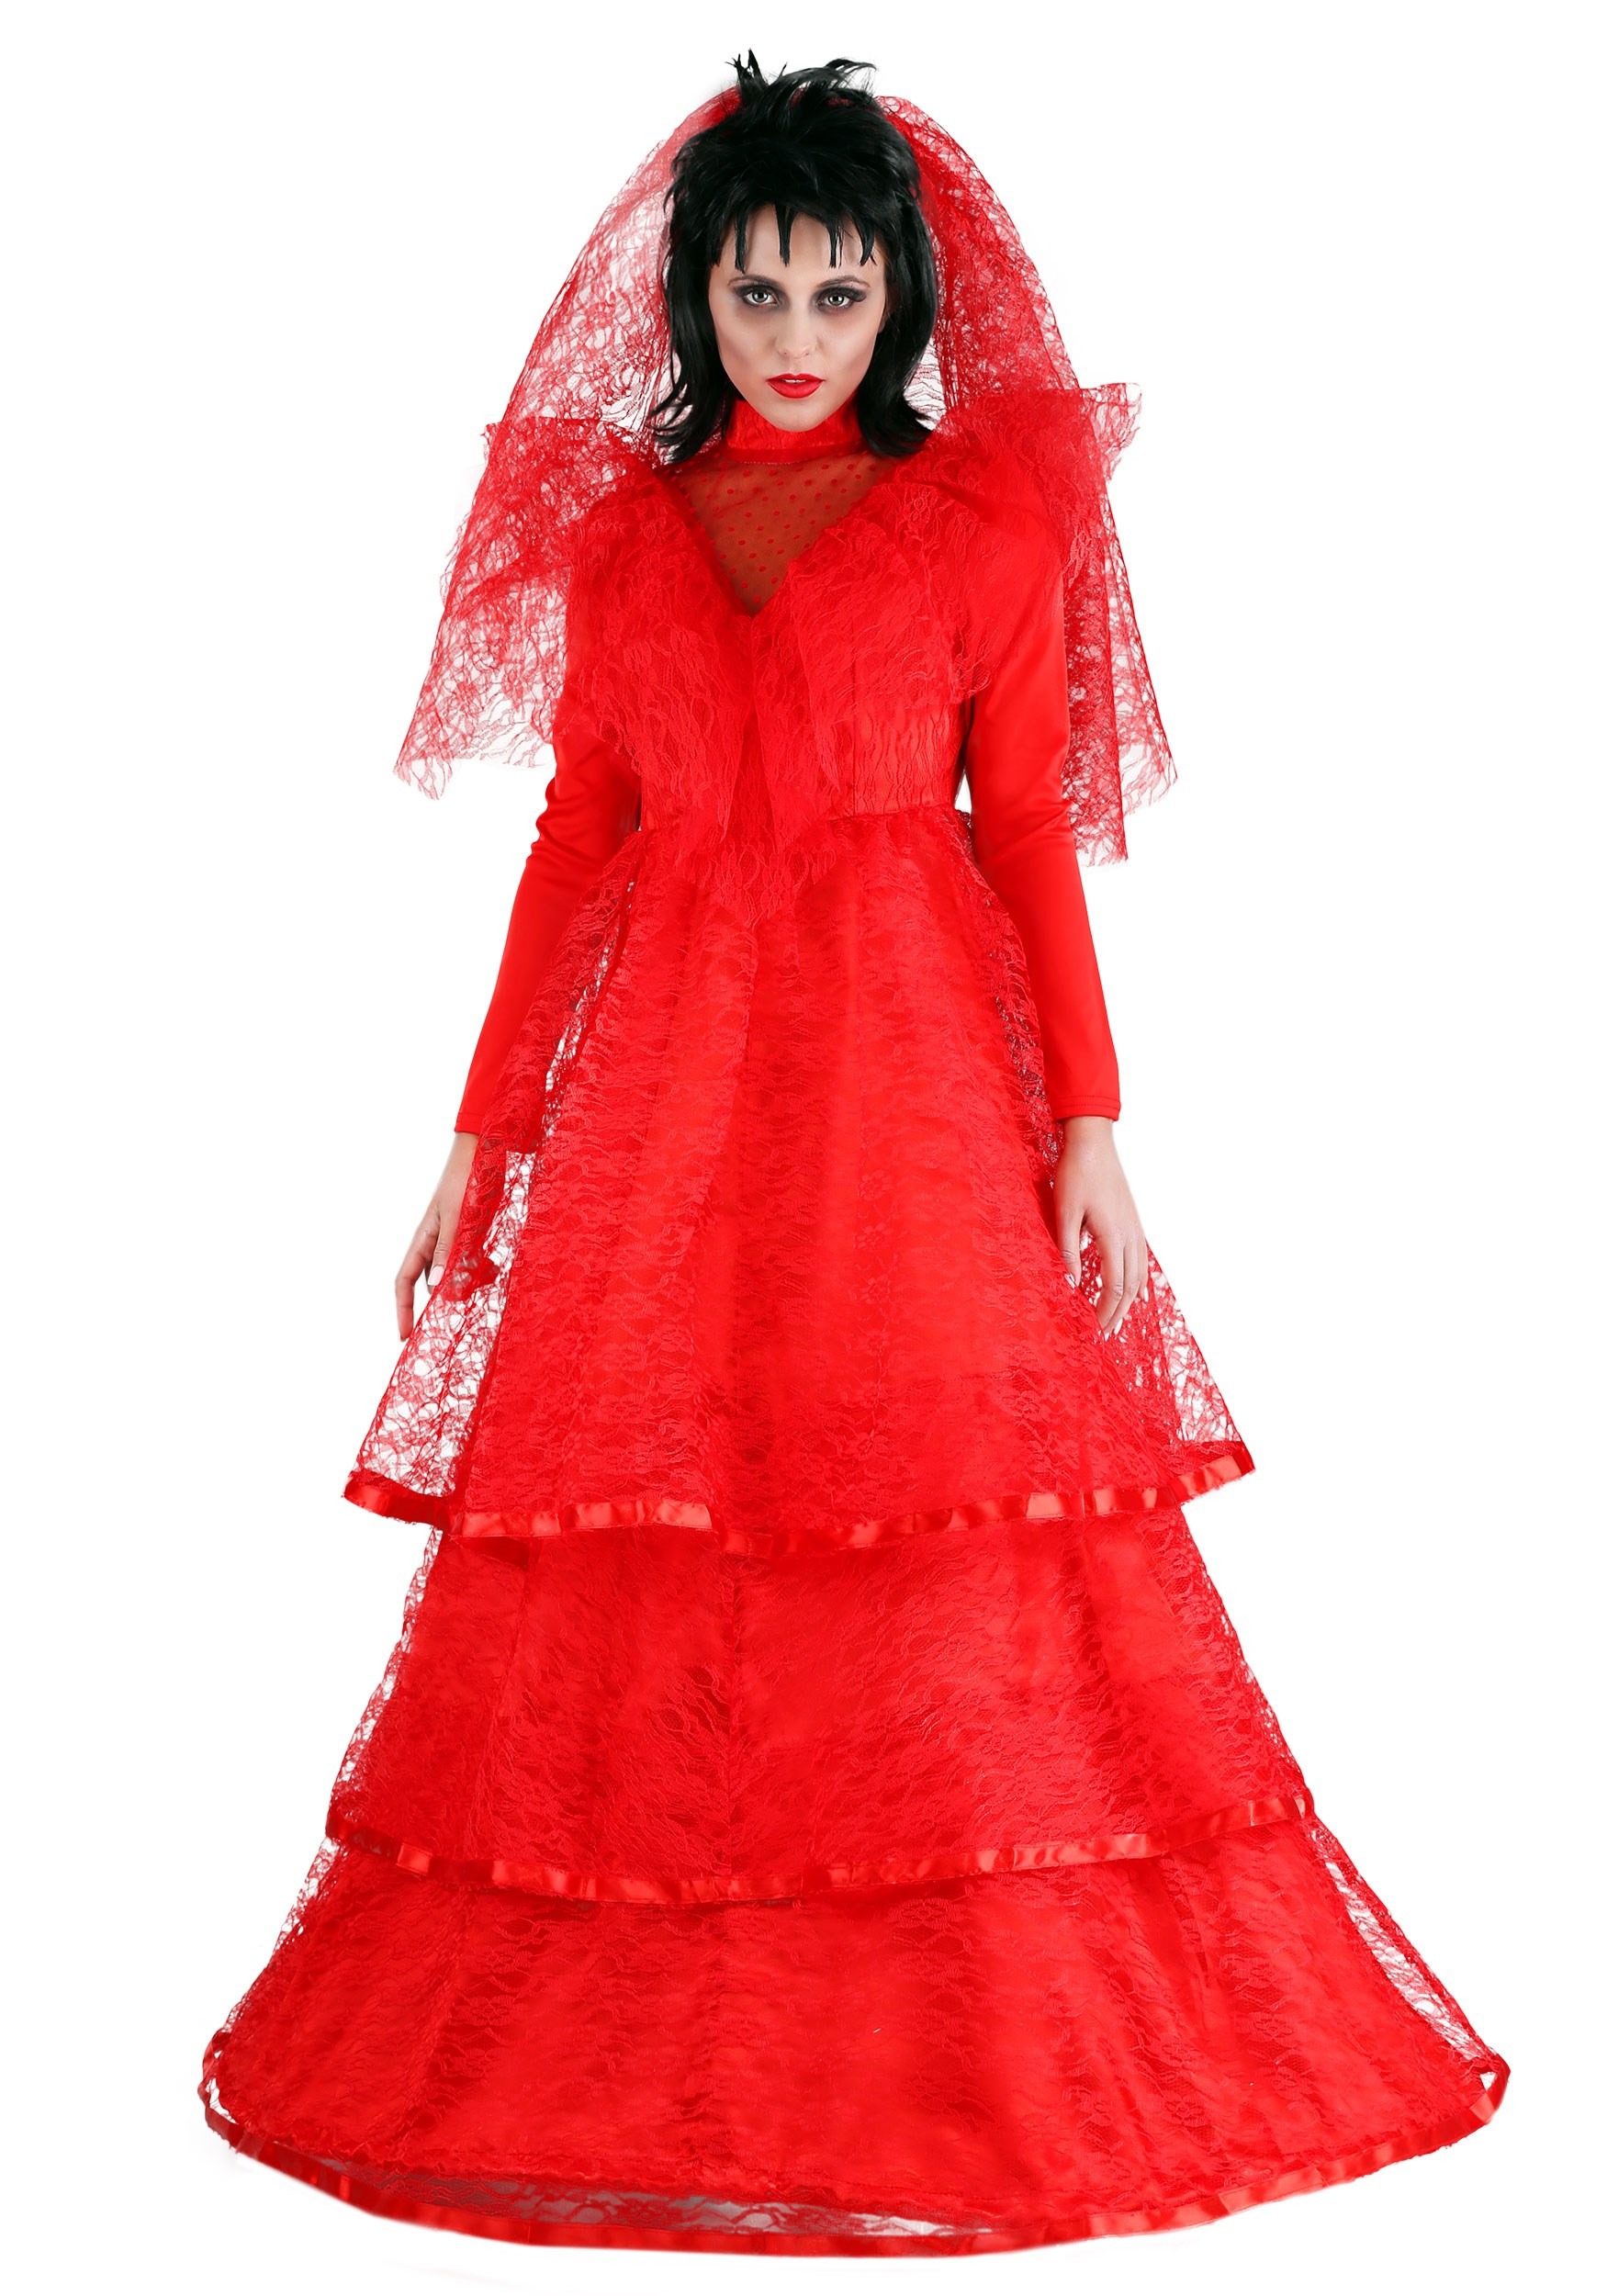 Image of Red Gothic Wedding Dress Plus Size Costume ID FUN2151PL-3X